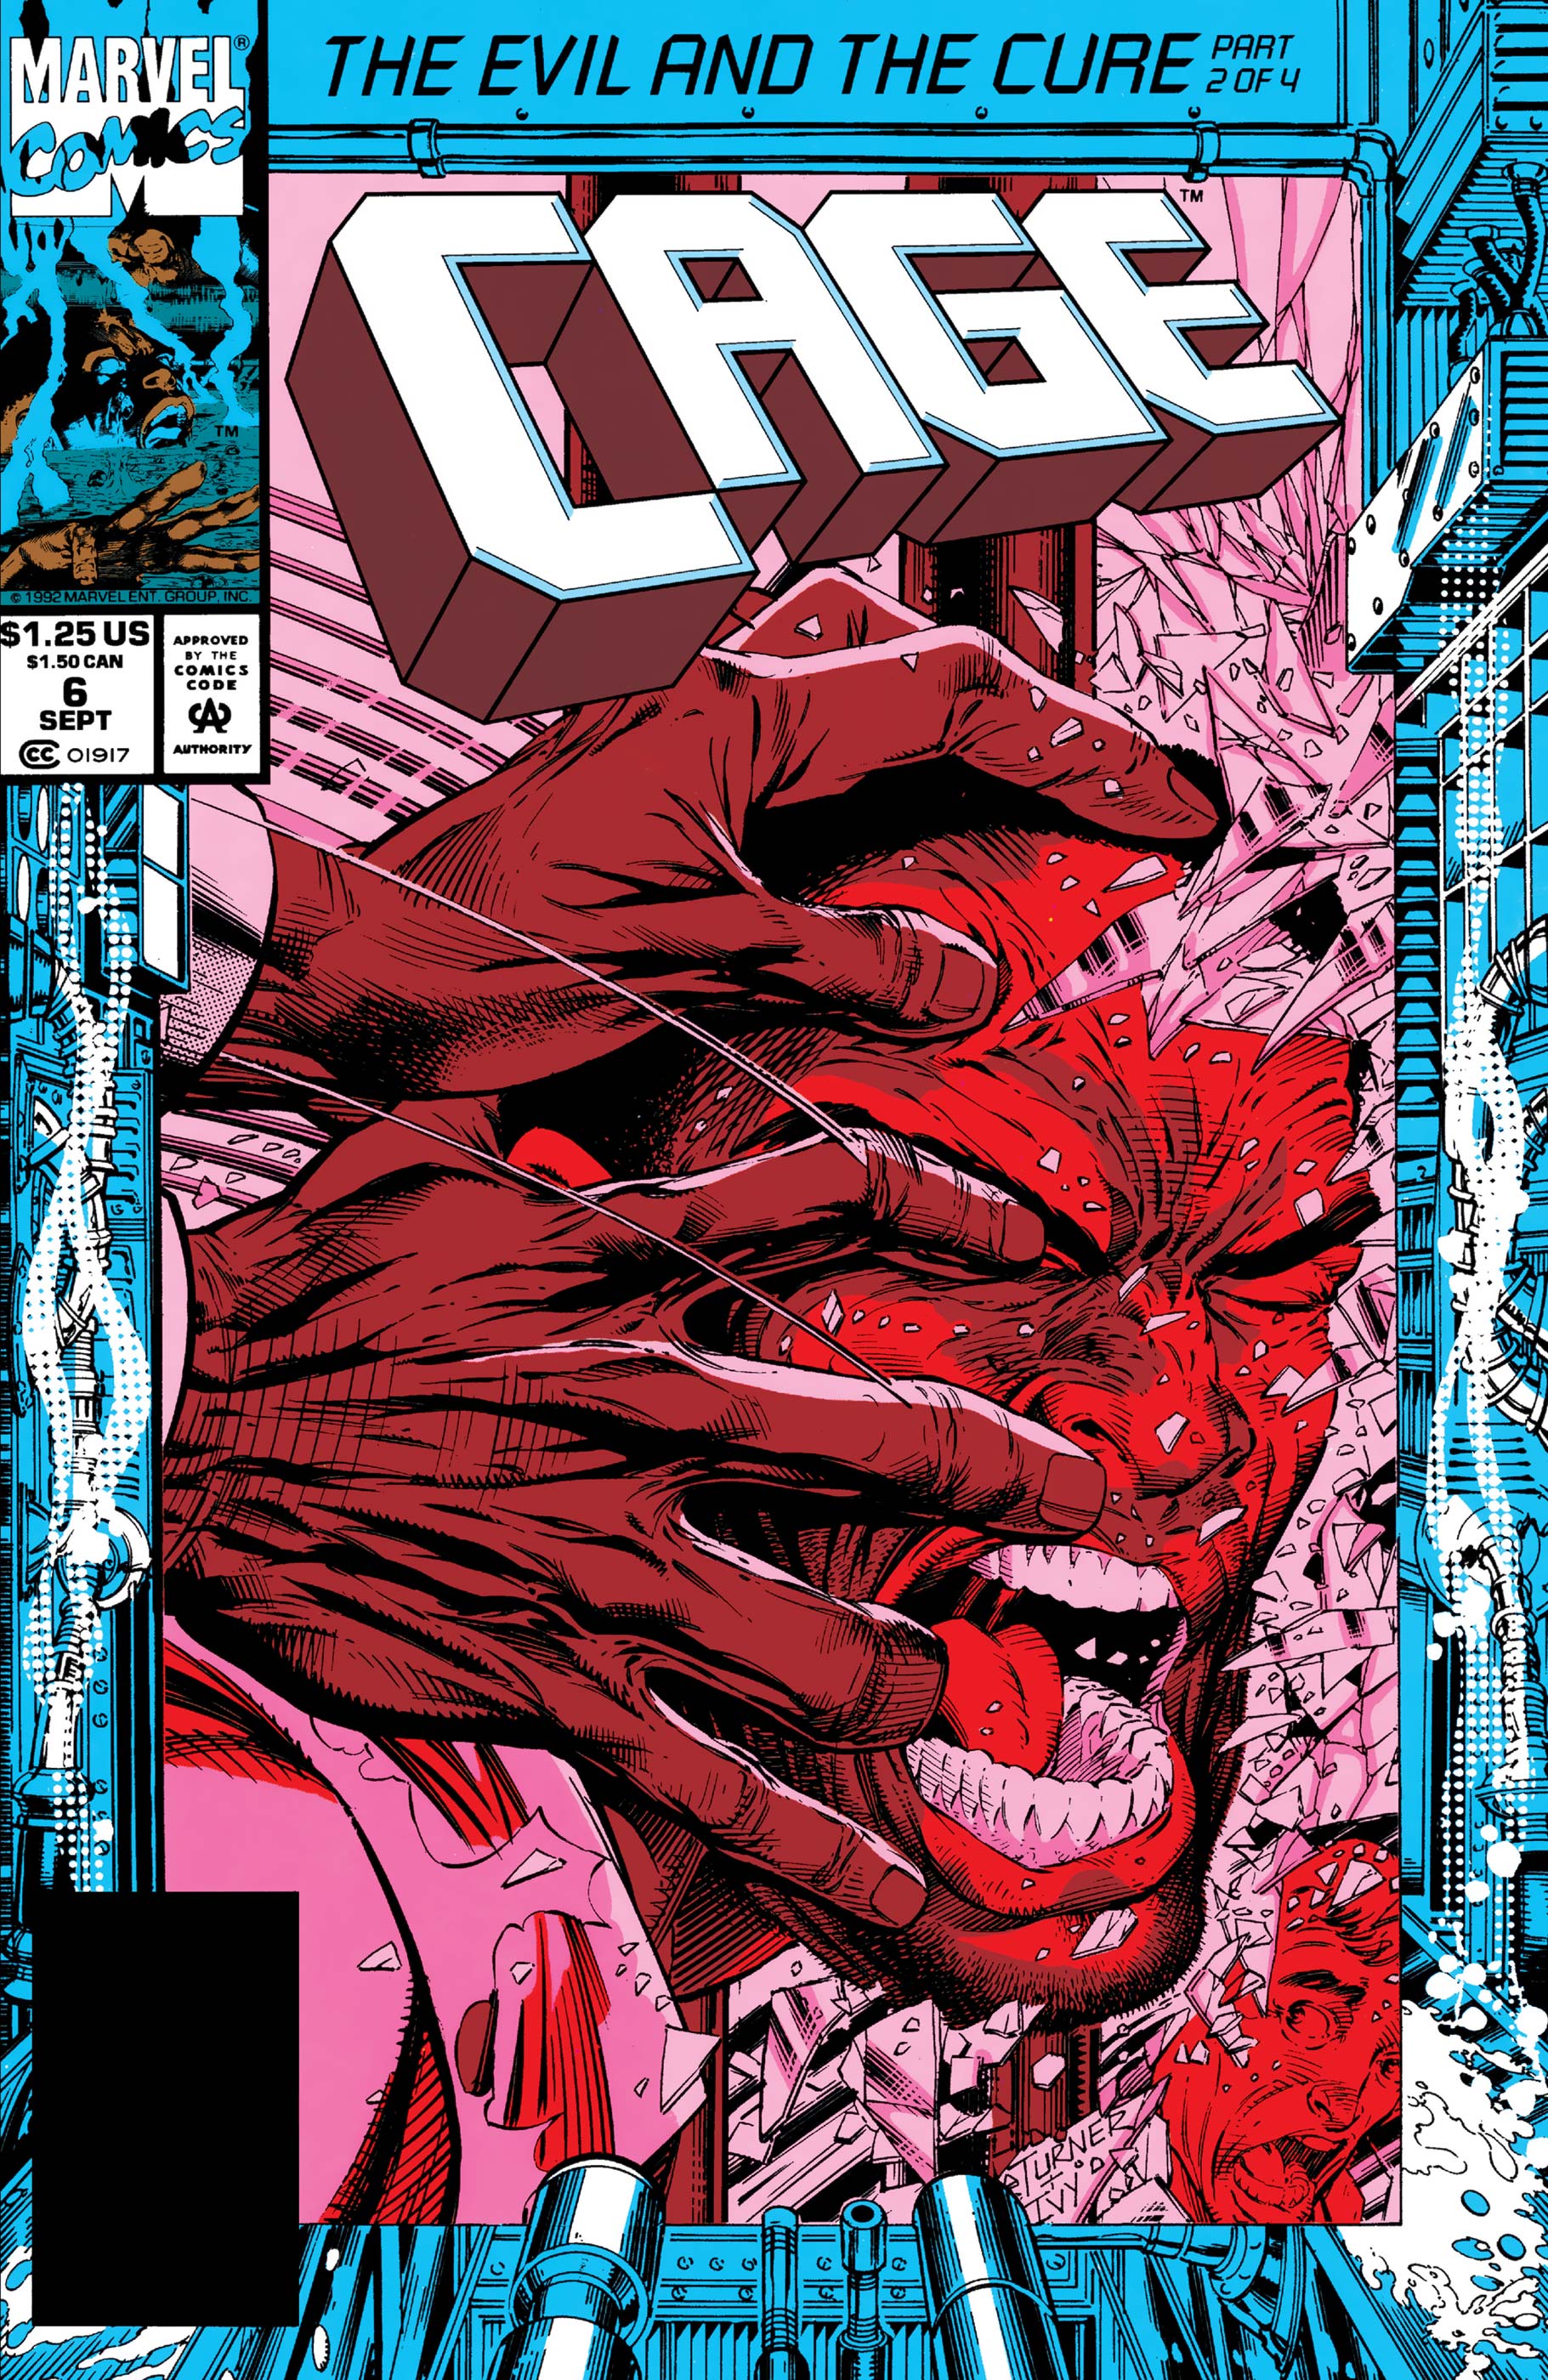 Cage (1992) #6